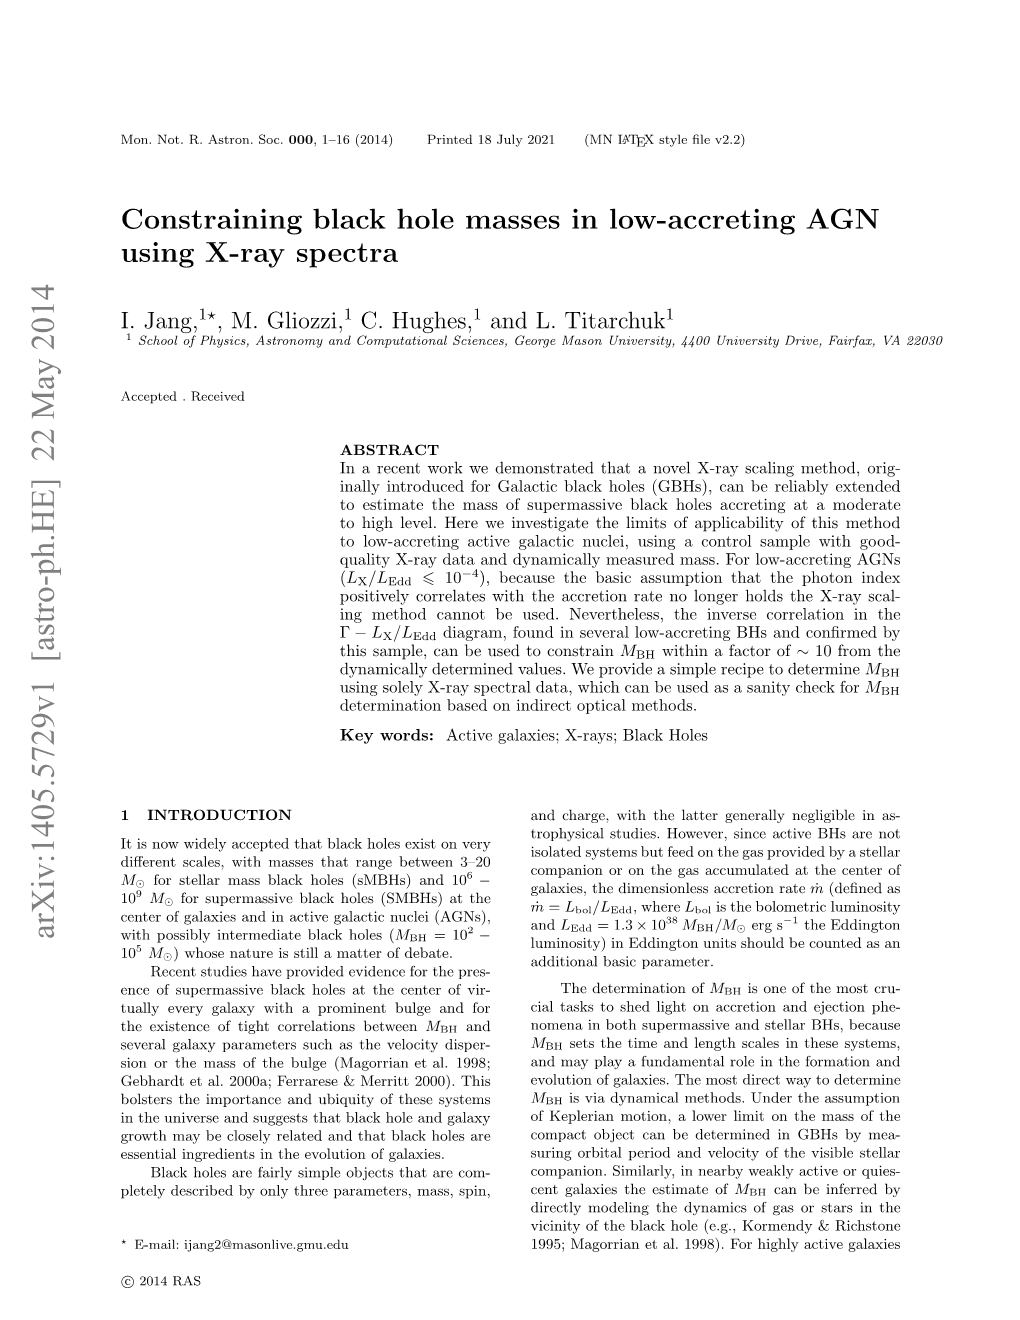 Constraining Black Hole Masses in Low-Accreting AGN Using X-Ray Spectra